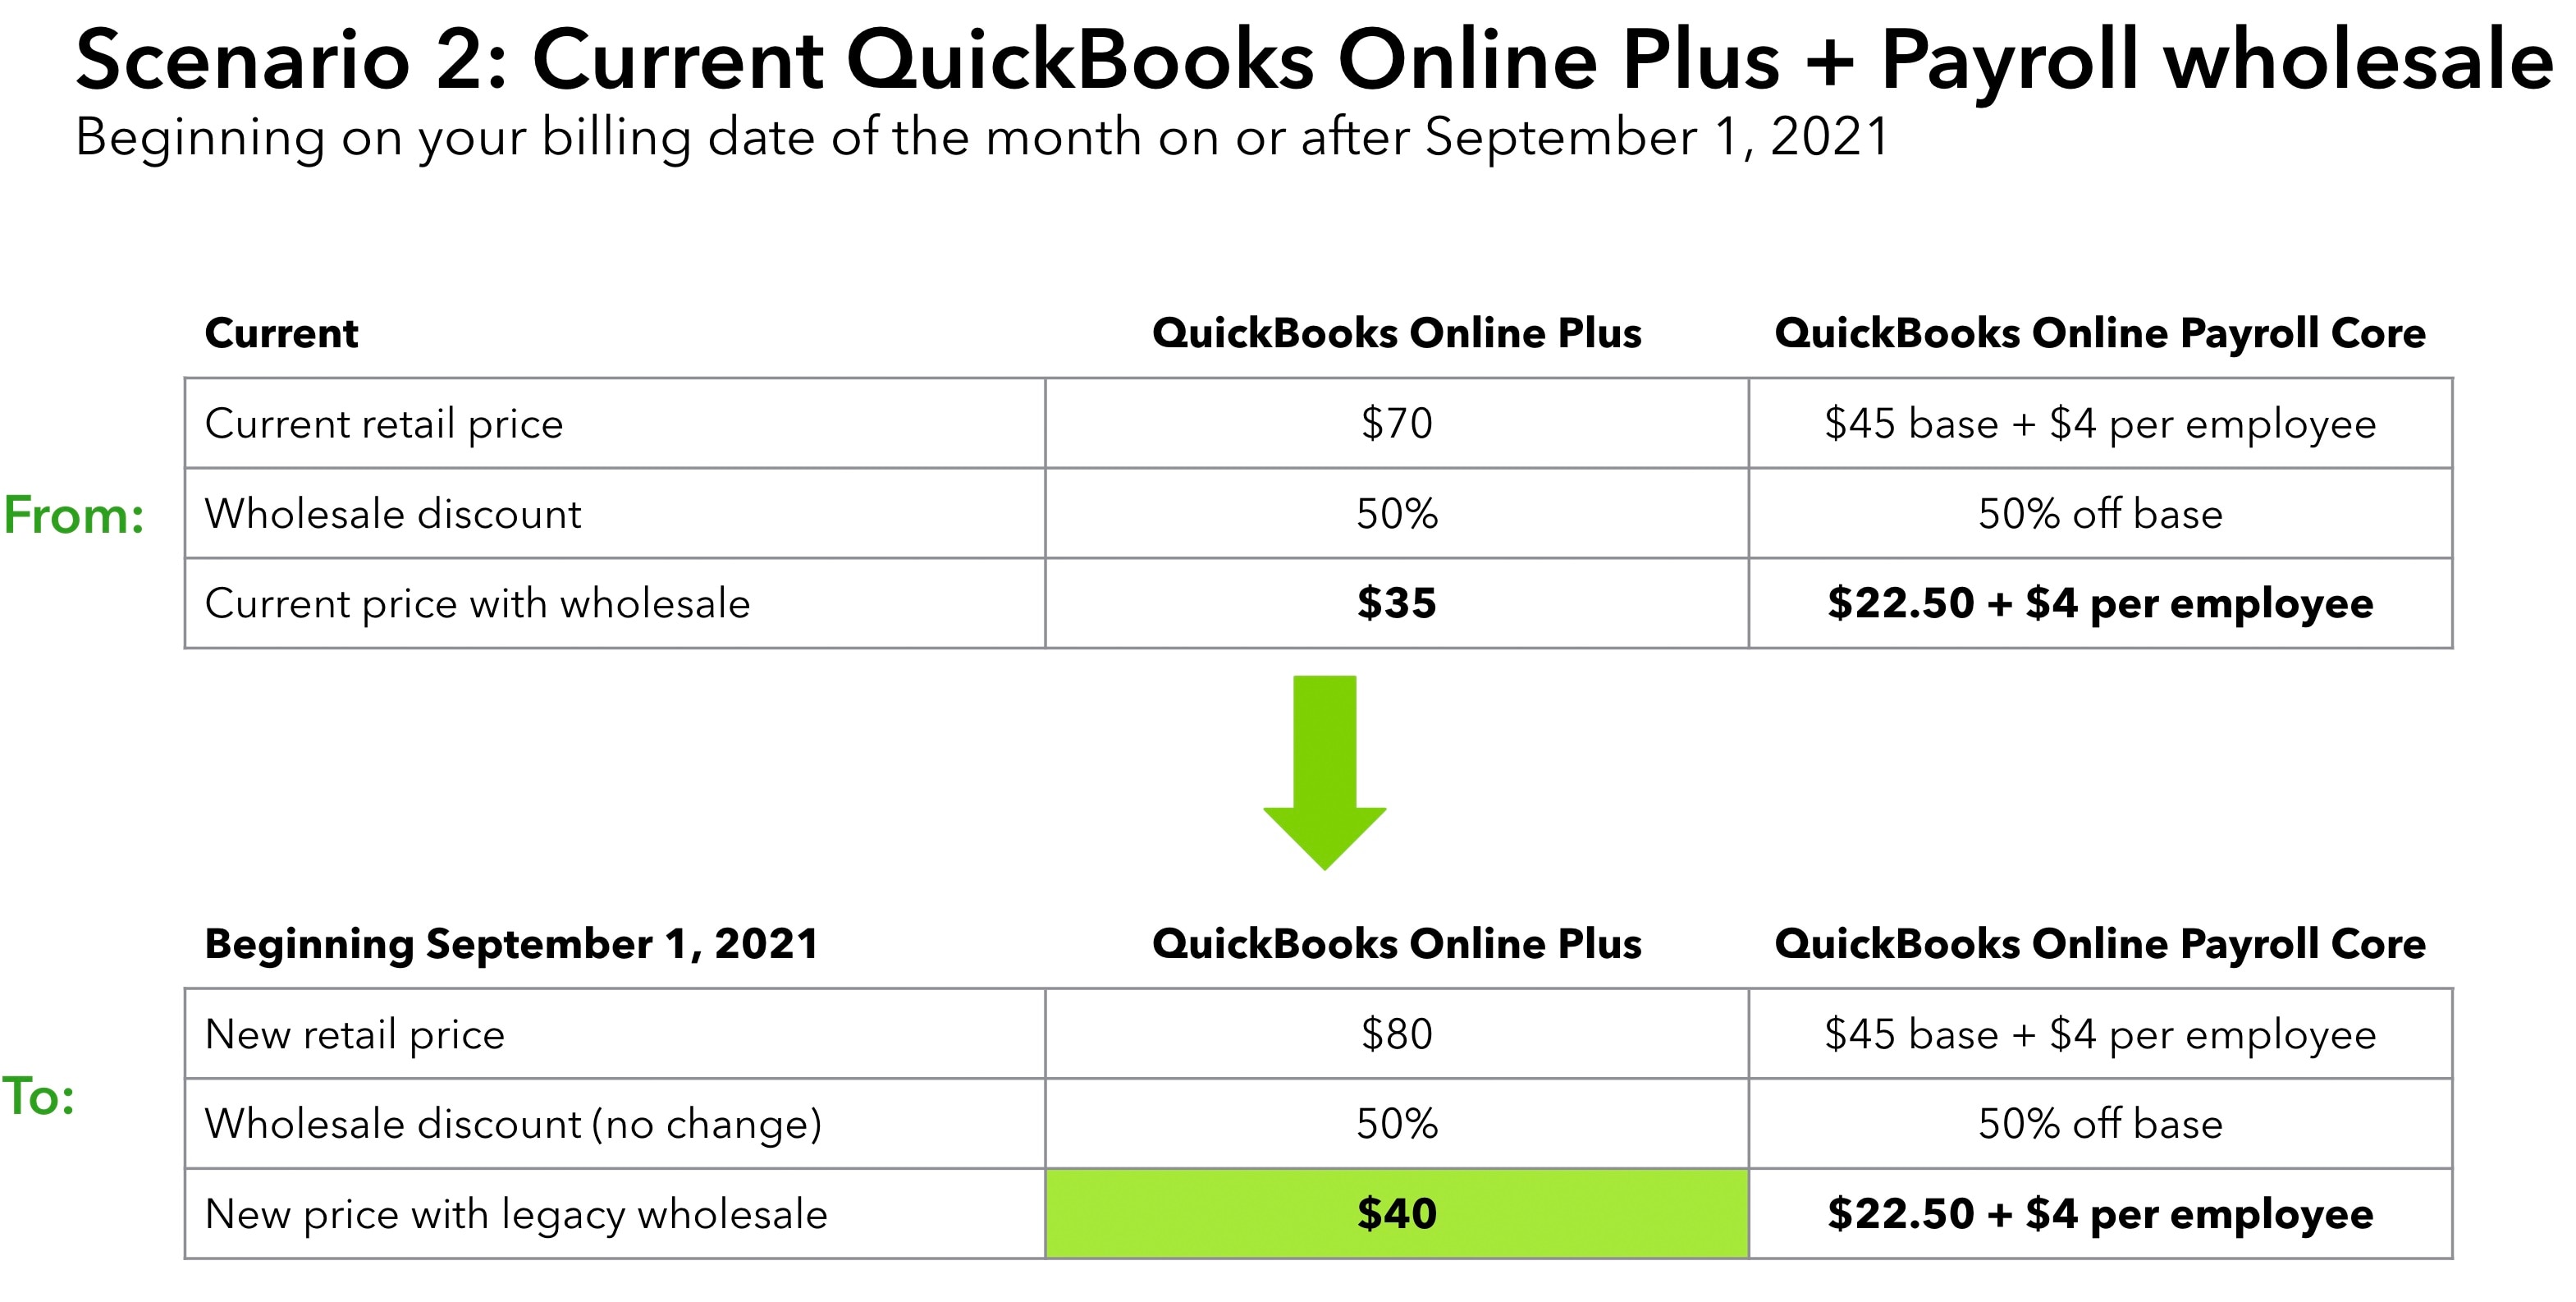 Upcoming changes: Accountant discounts and QuickBooks Online pricing